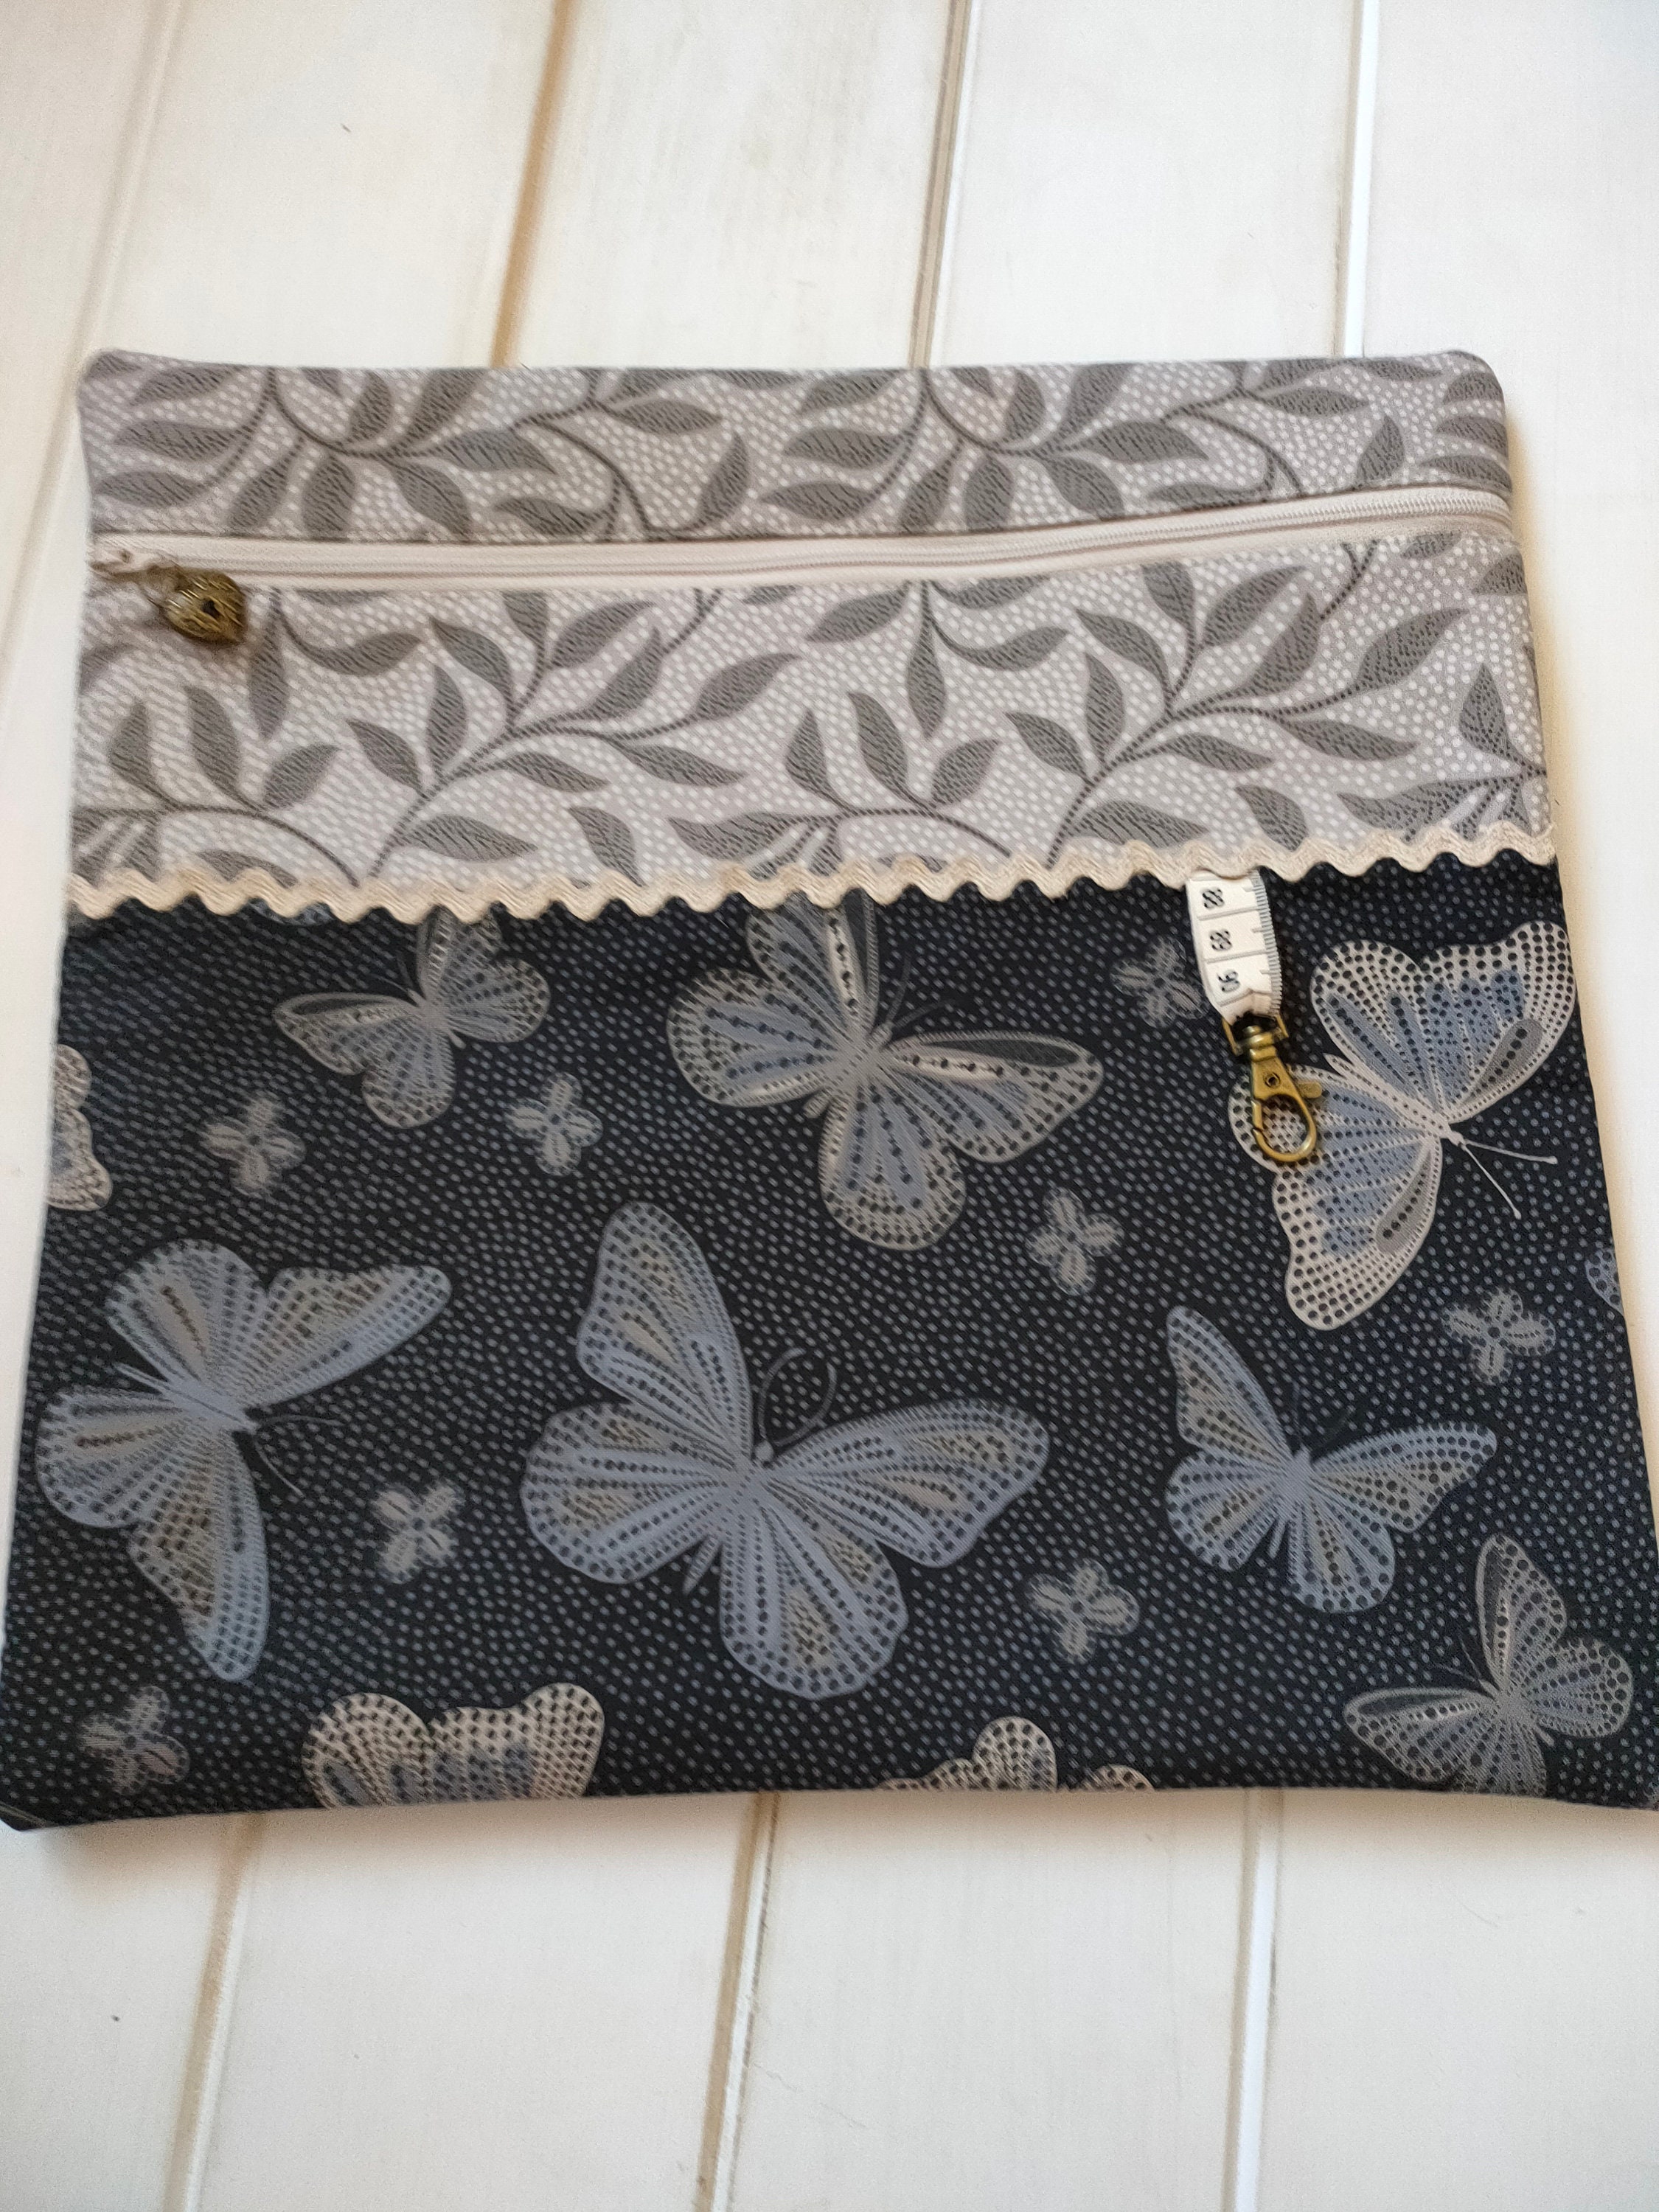 Project Bags – Stitch ALL The Things